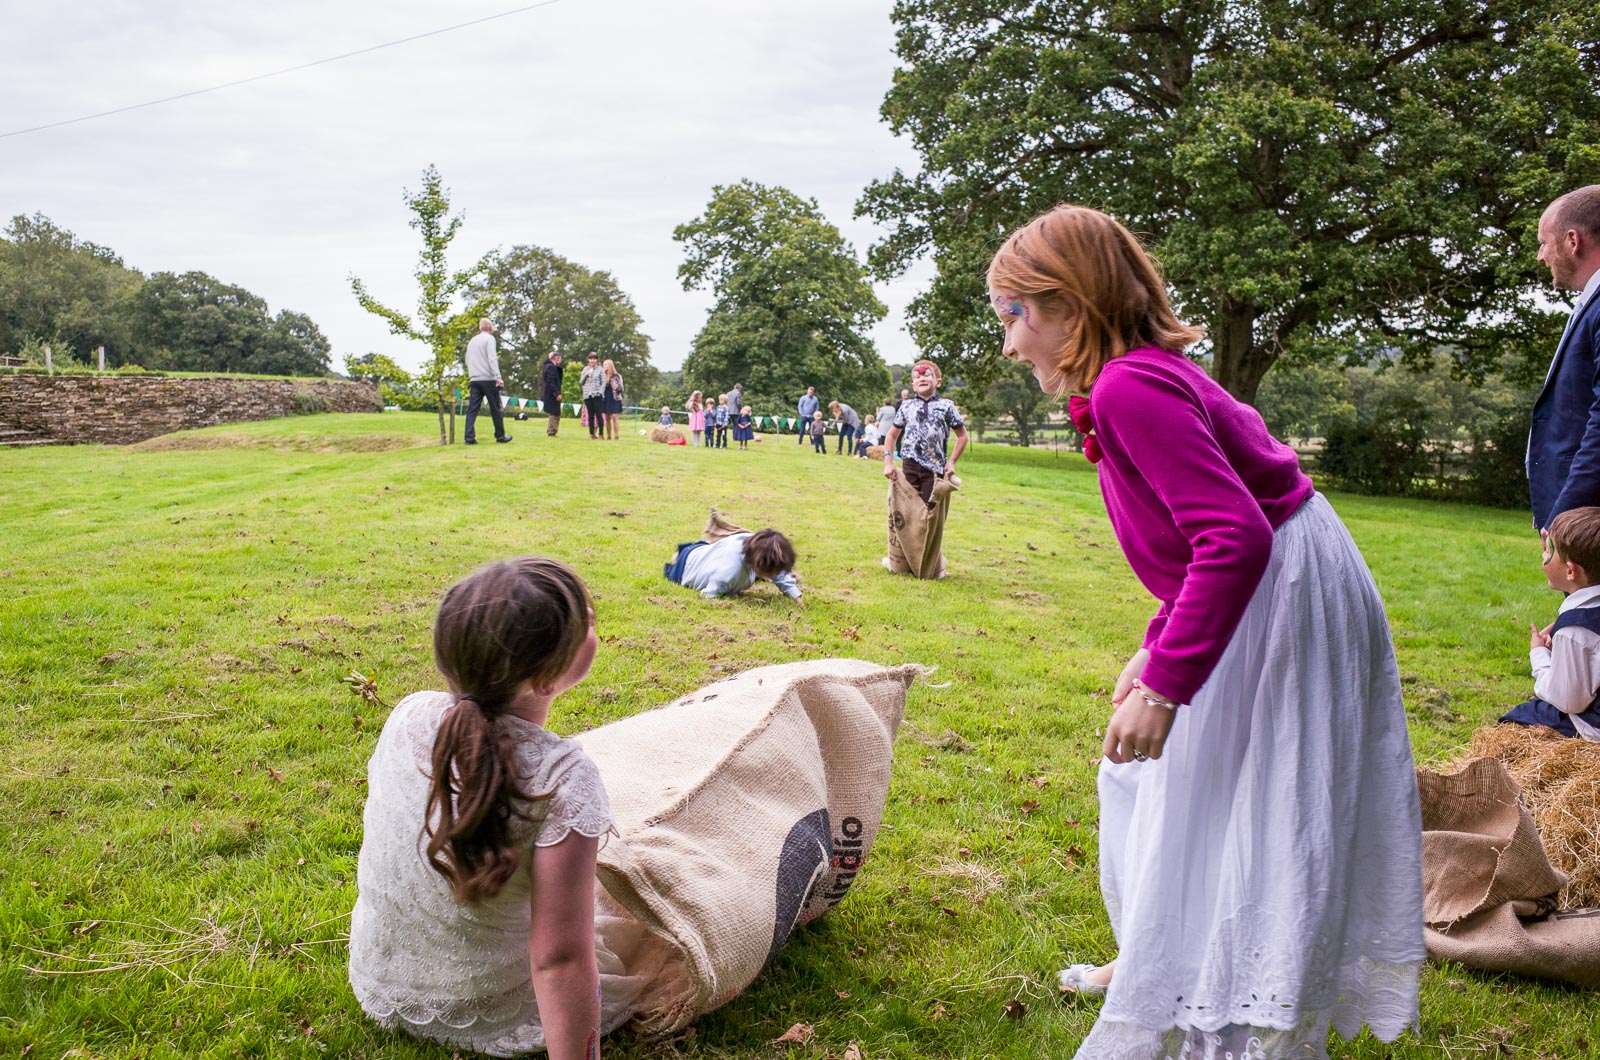 Wedding guests enjoy a sack race at Emily and Richard's wedding reception.